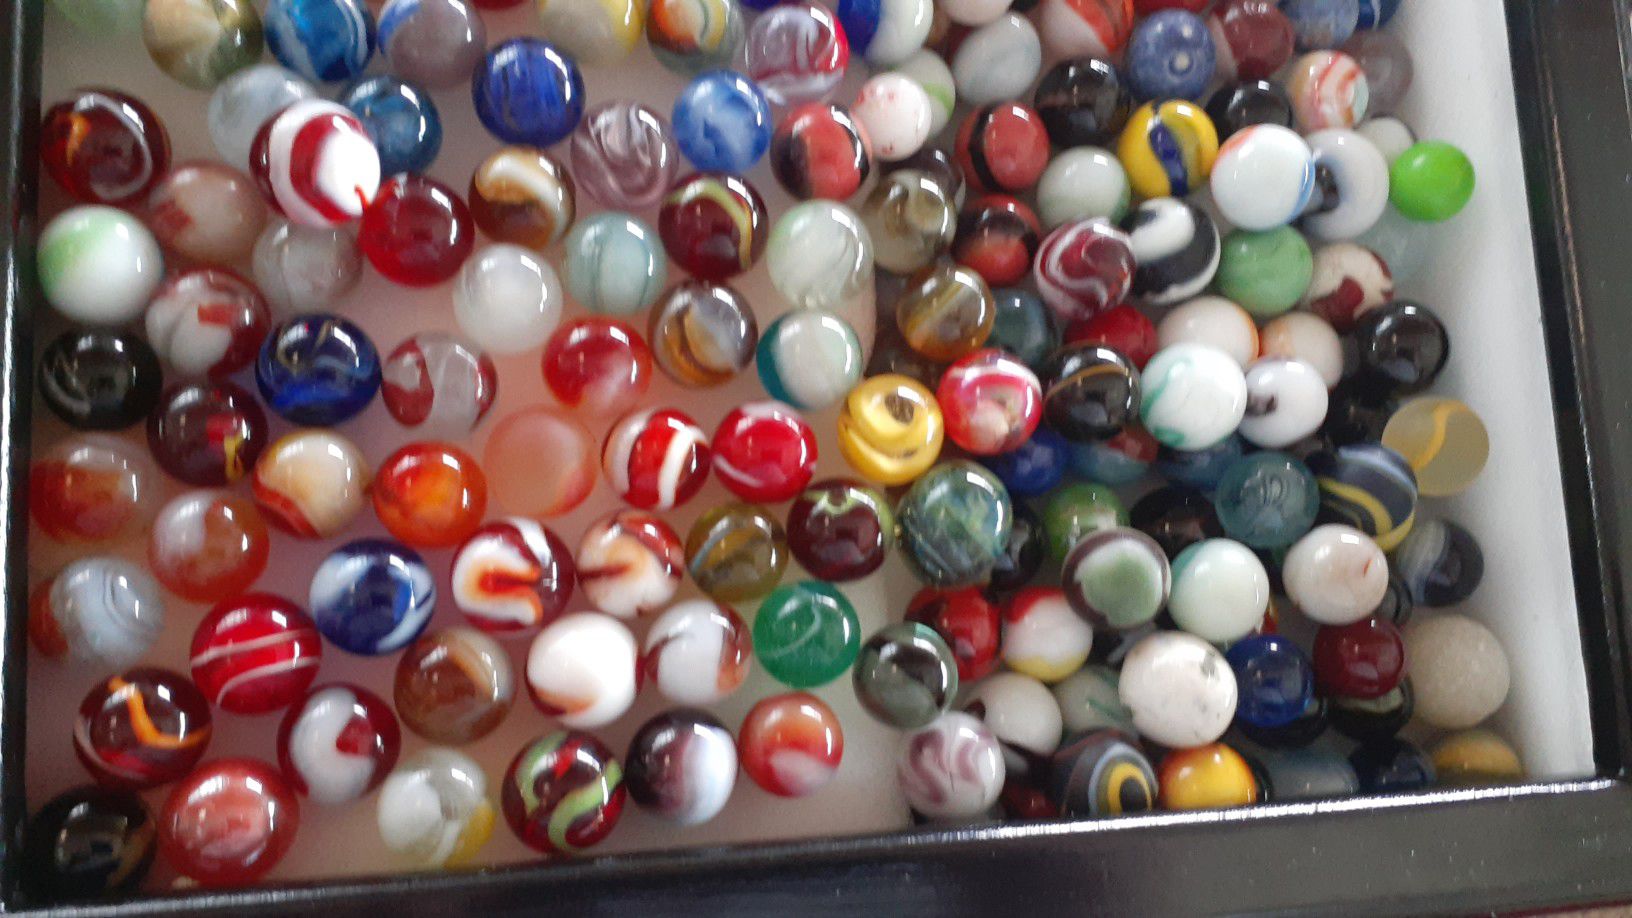 Many kinds of marbles